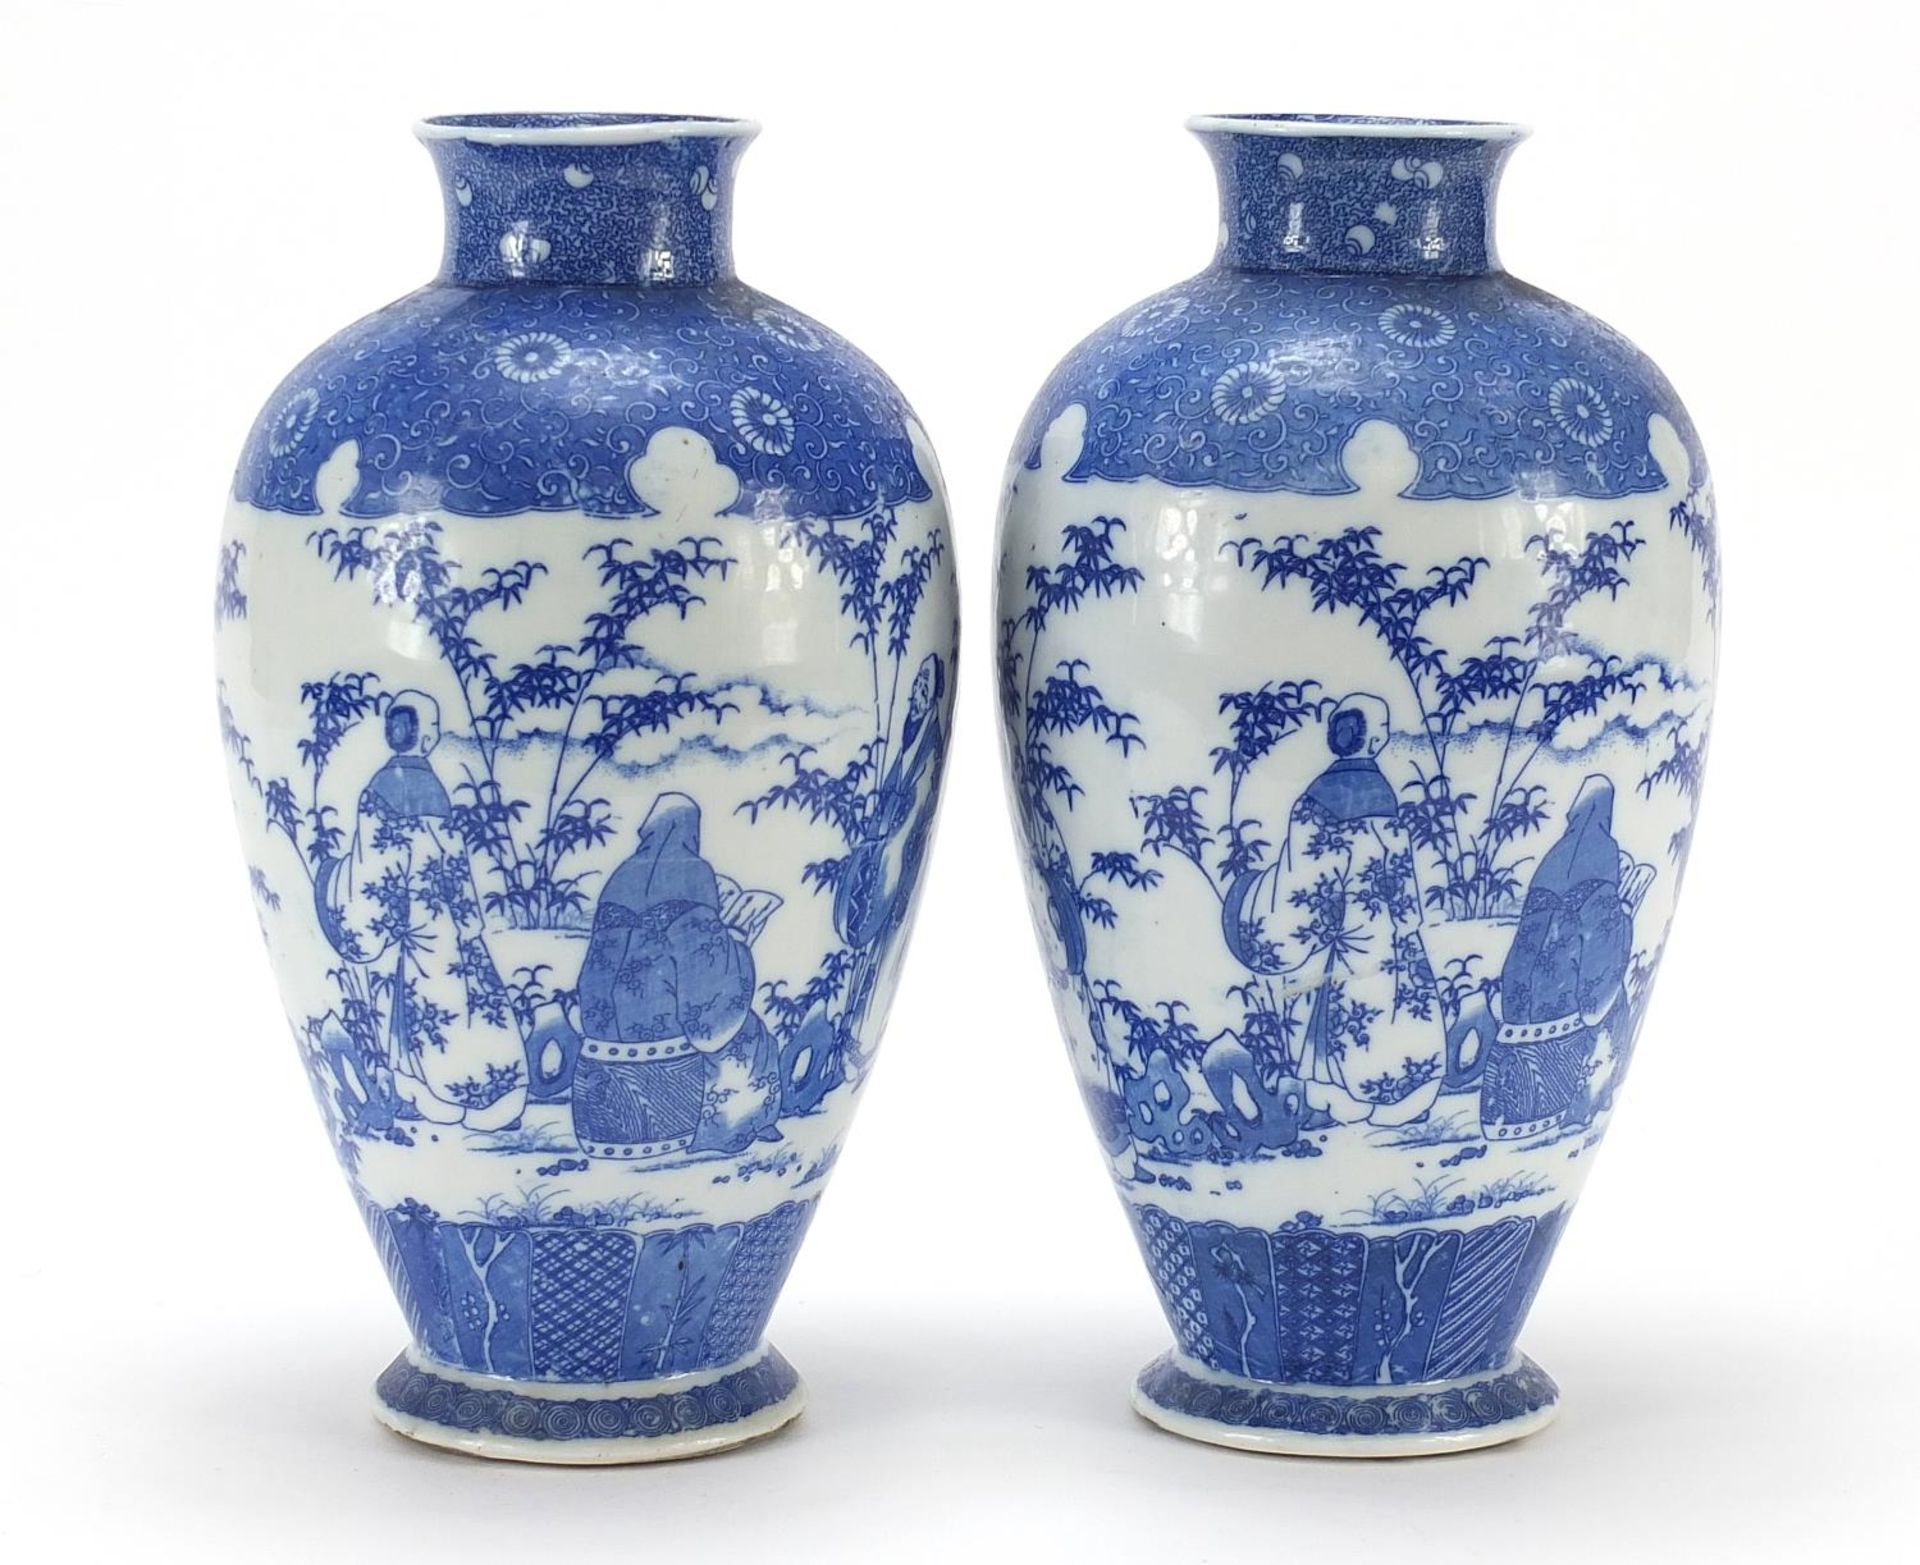 Pair of Japanese blue and white porcelain vases, each decorated with scholars in a landscape, - Image 5 of 9